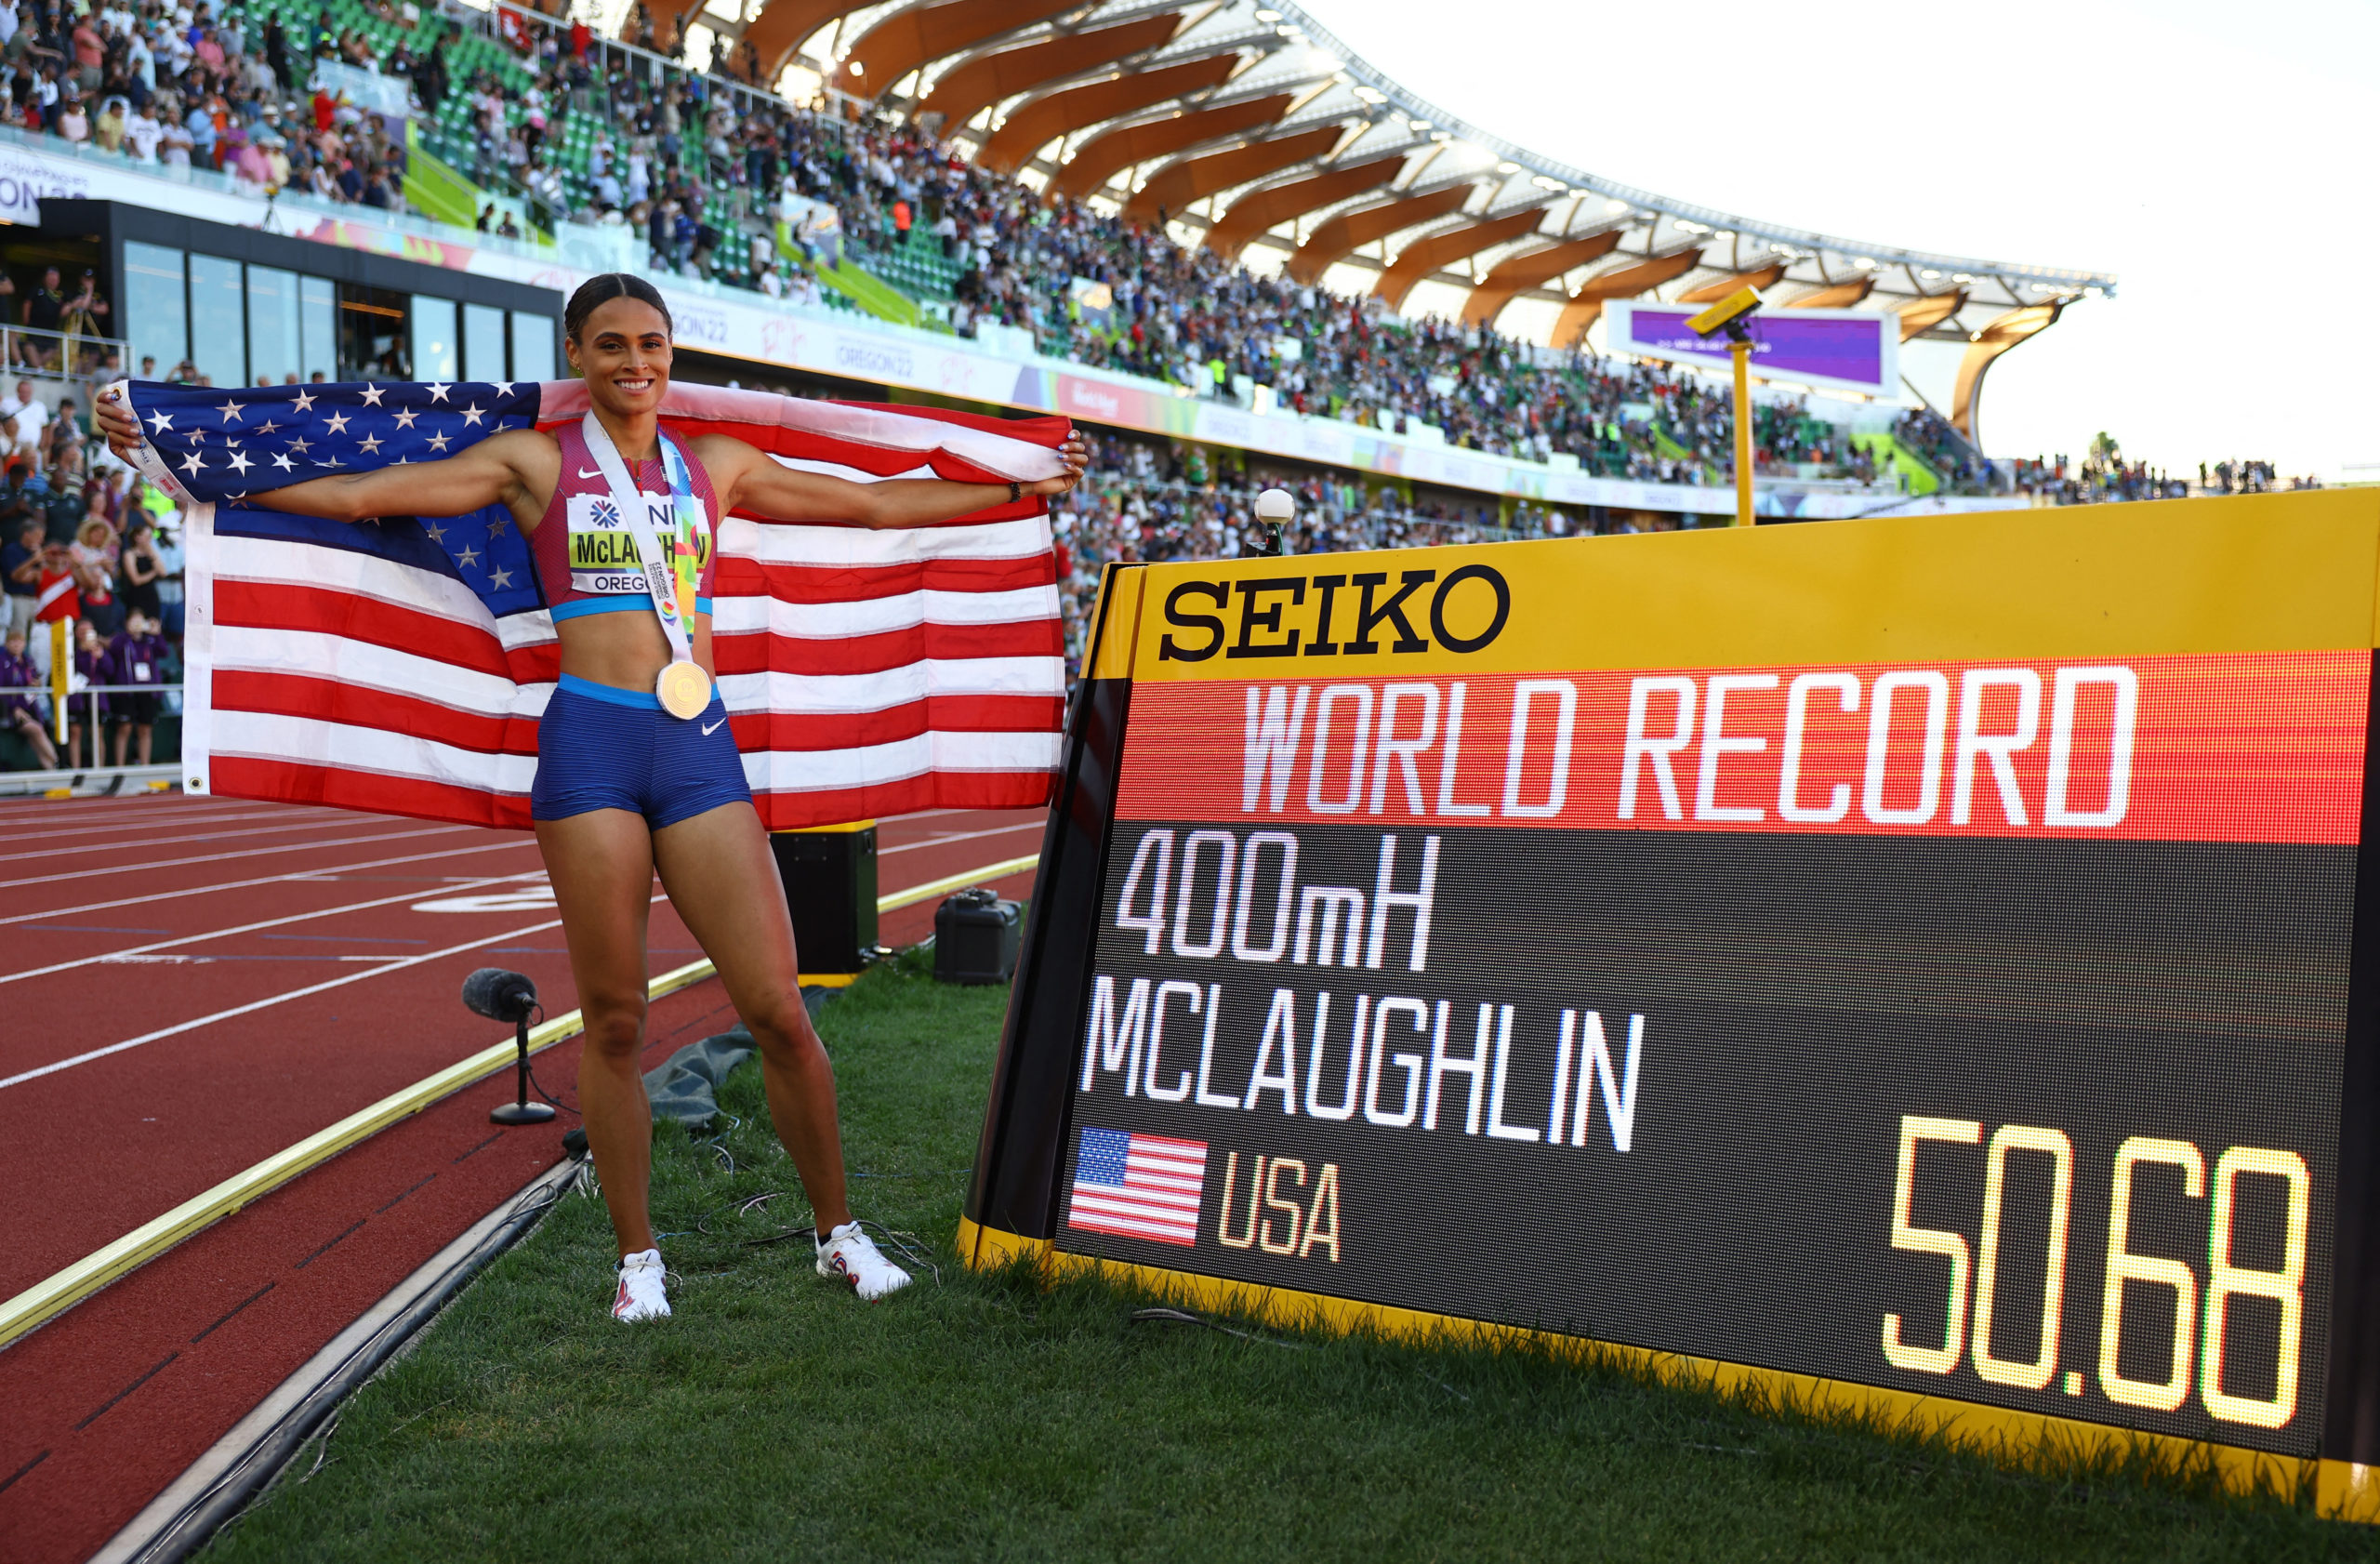 Gold medallist Sydney McLaughlin of the U.S. celebrates after winning the women's 400 metres hurdles final and setting a new world record Athletics - World Athletics Championships - Women's 400 Metres Hurdles - Final - Hayward Field, Eugene, Oregon, U.S.